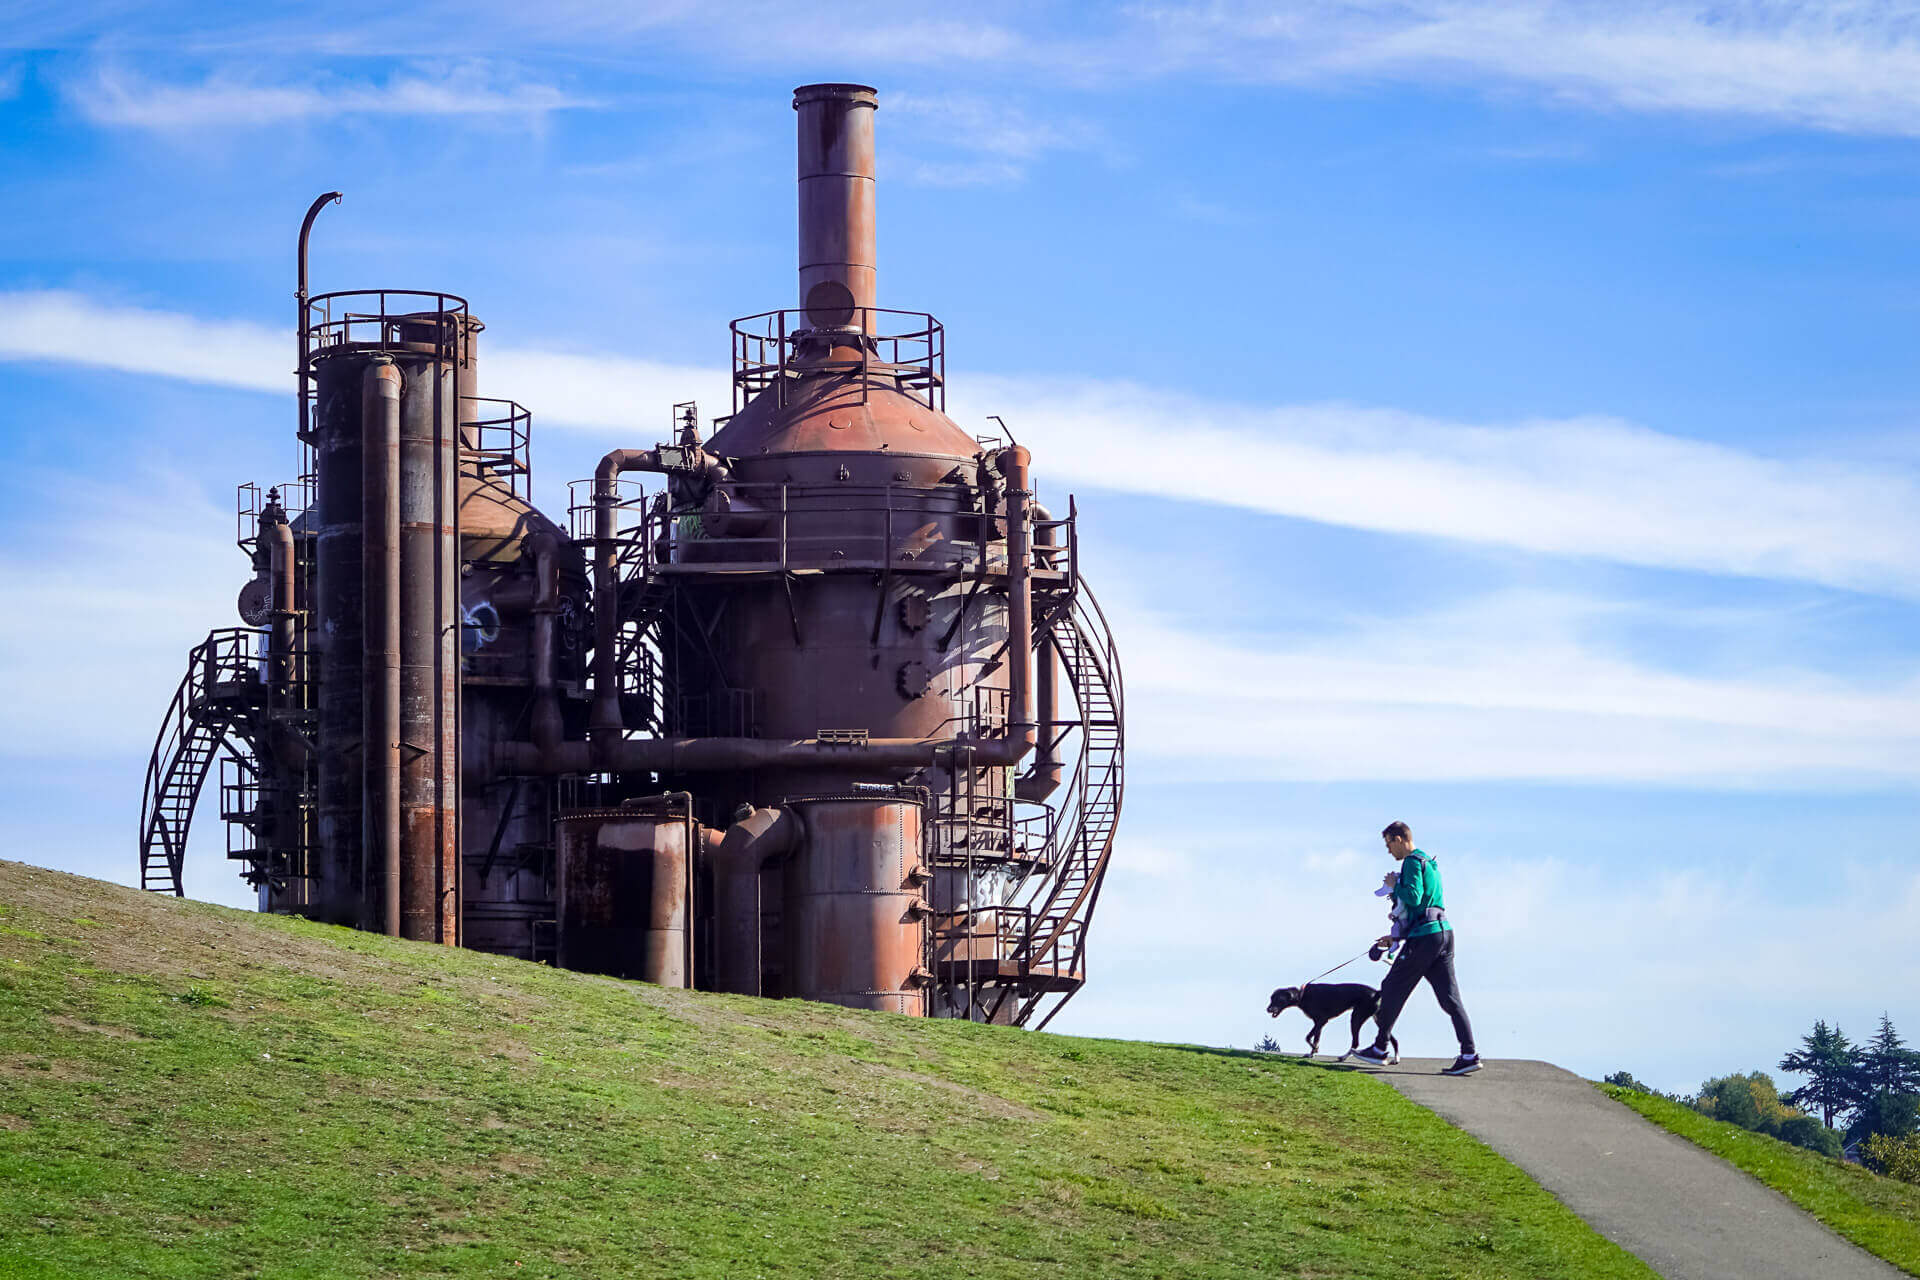 A man carrying a baby walks a dog at Gasworks Park in Seattle, one of Washington's dog-friendly destinations